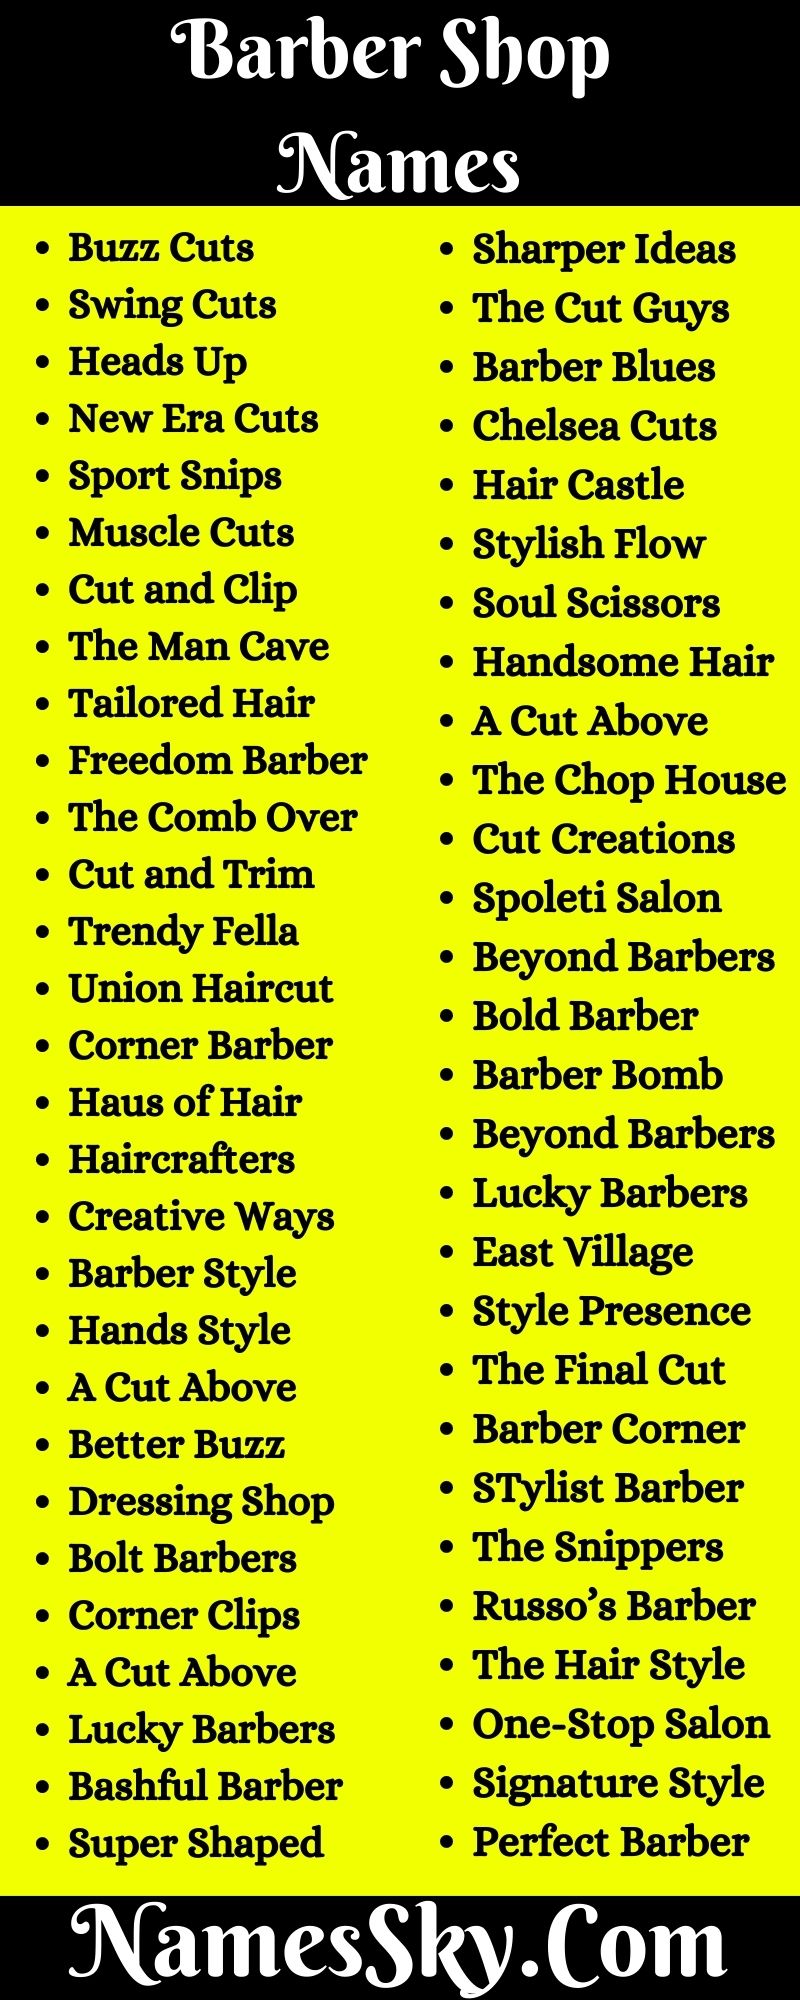 Barber Shop Names Inform Every Barber To Look At This